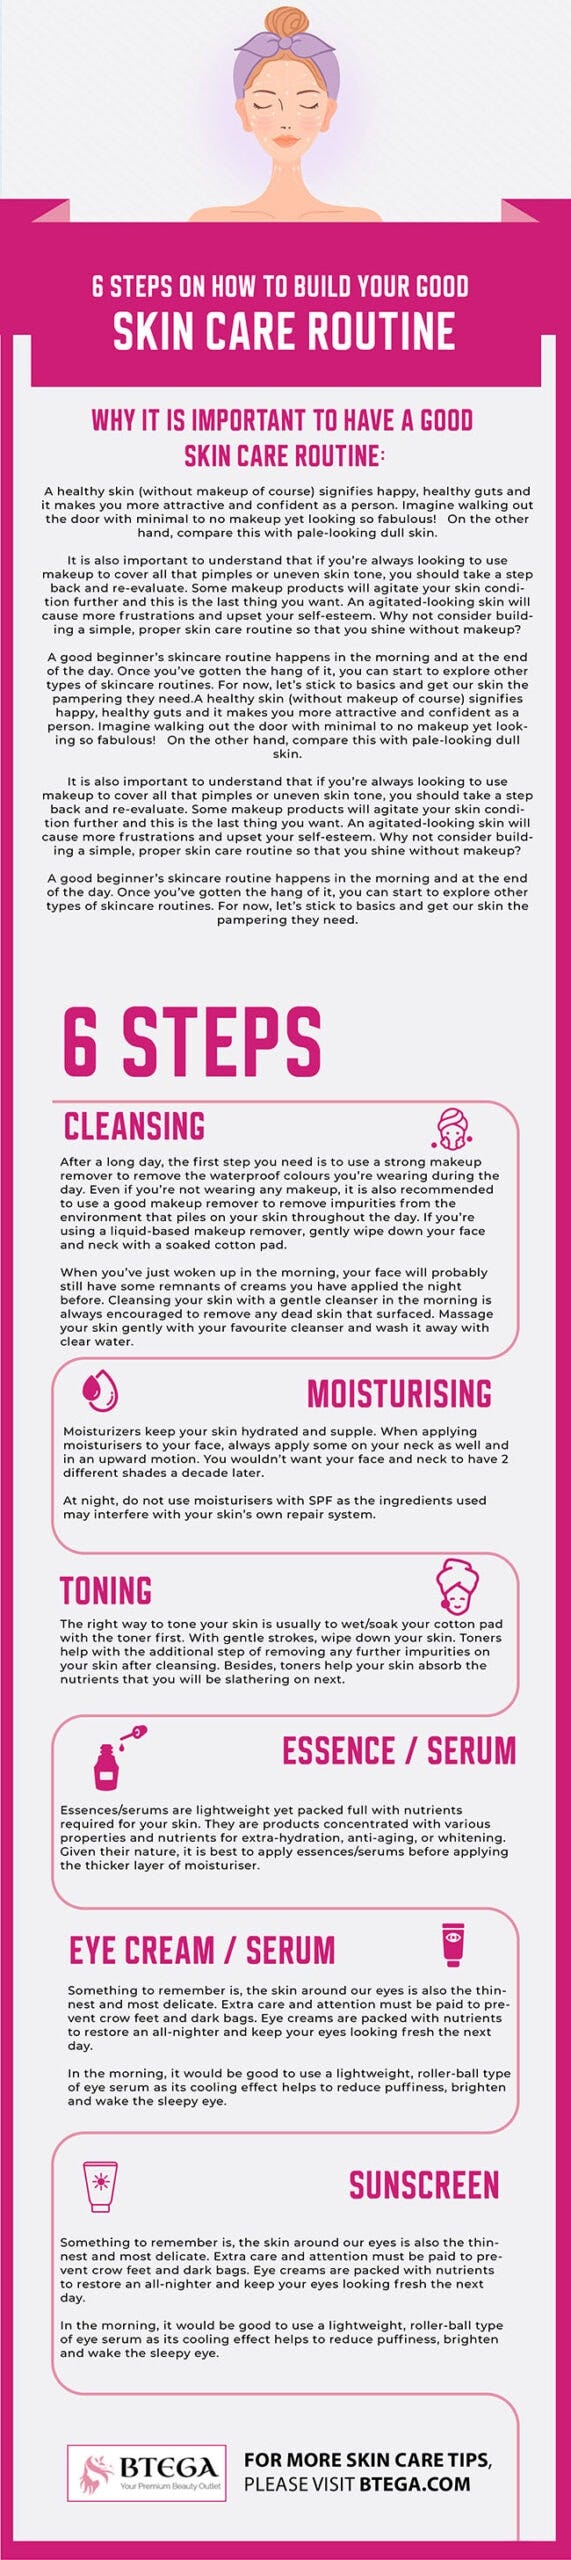 6 TIPS TO CREATE AN ESSENTIAL EYE CARE ROUTINE!